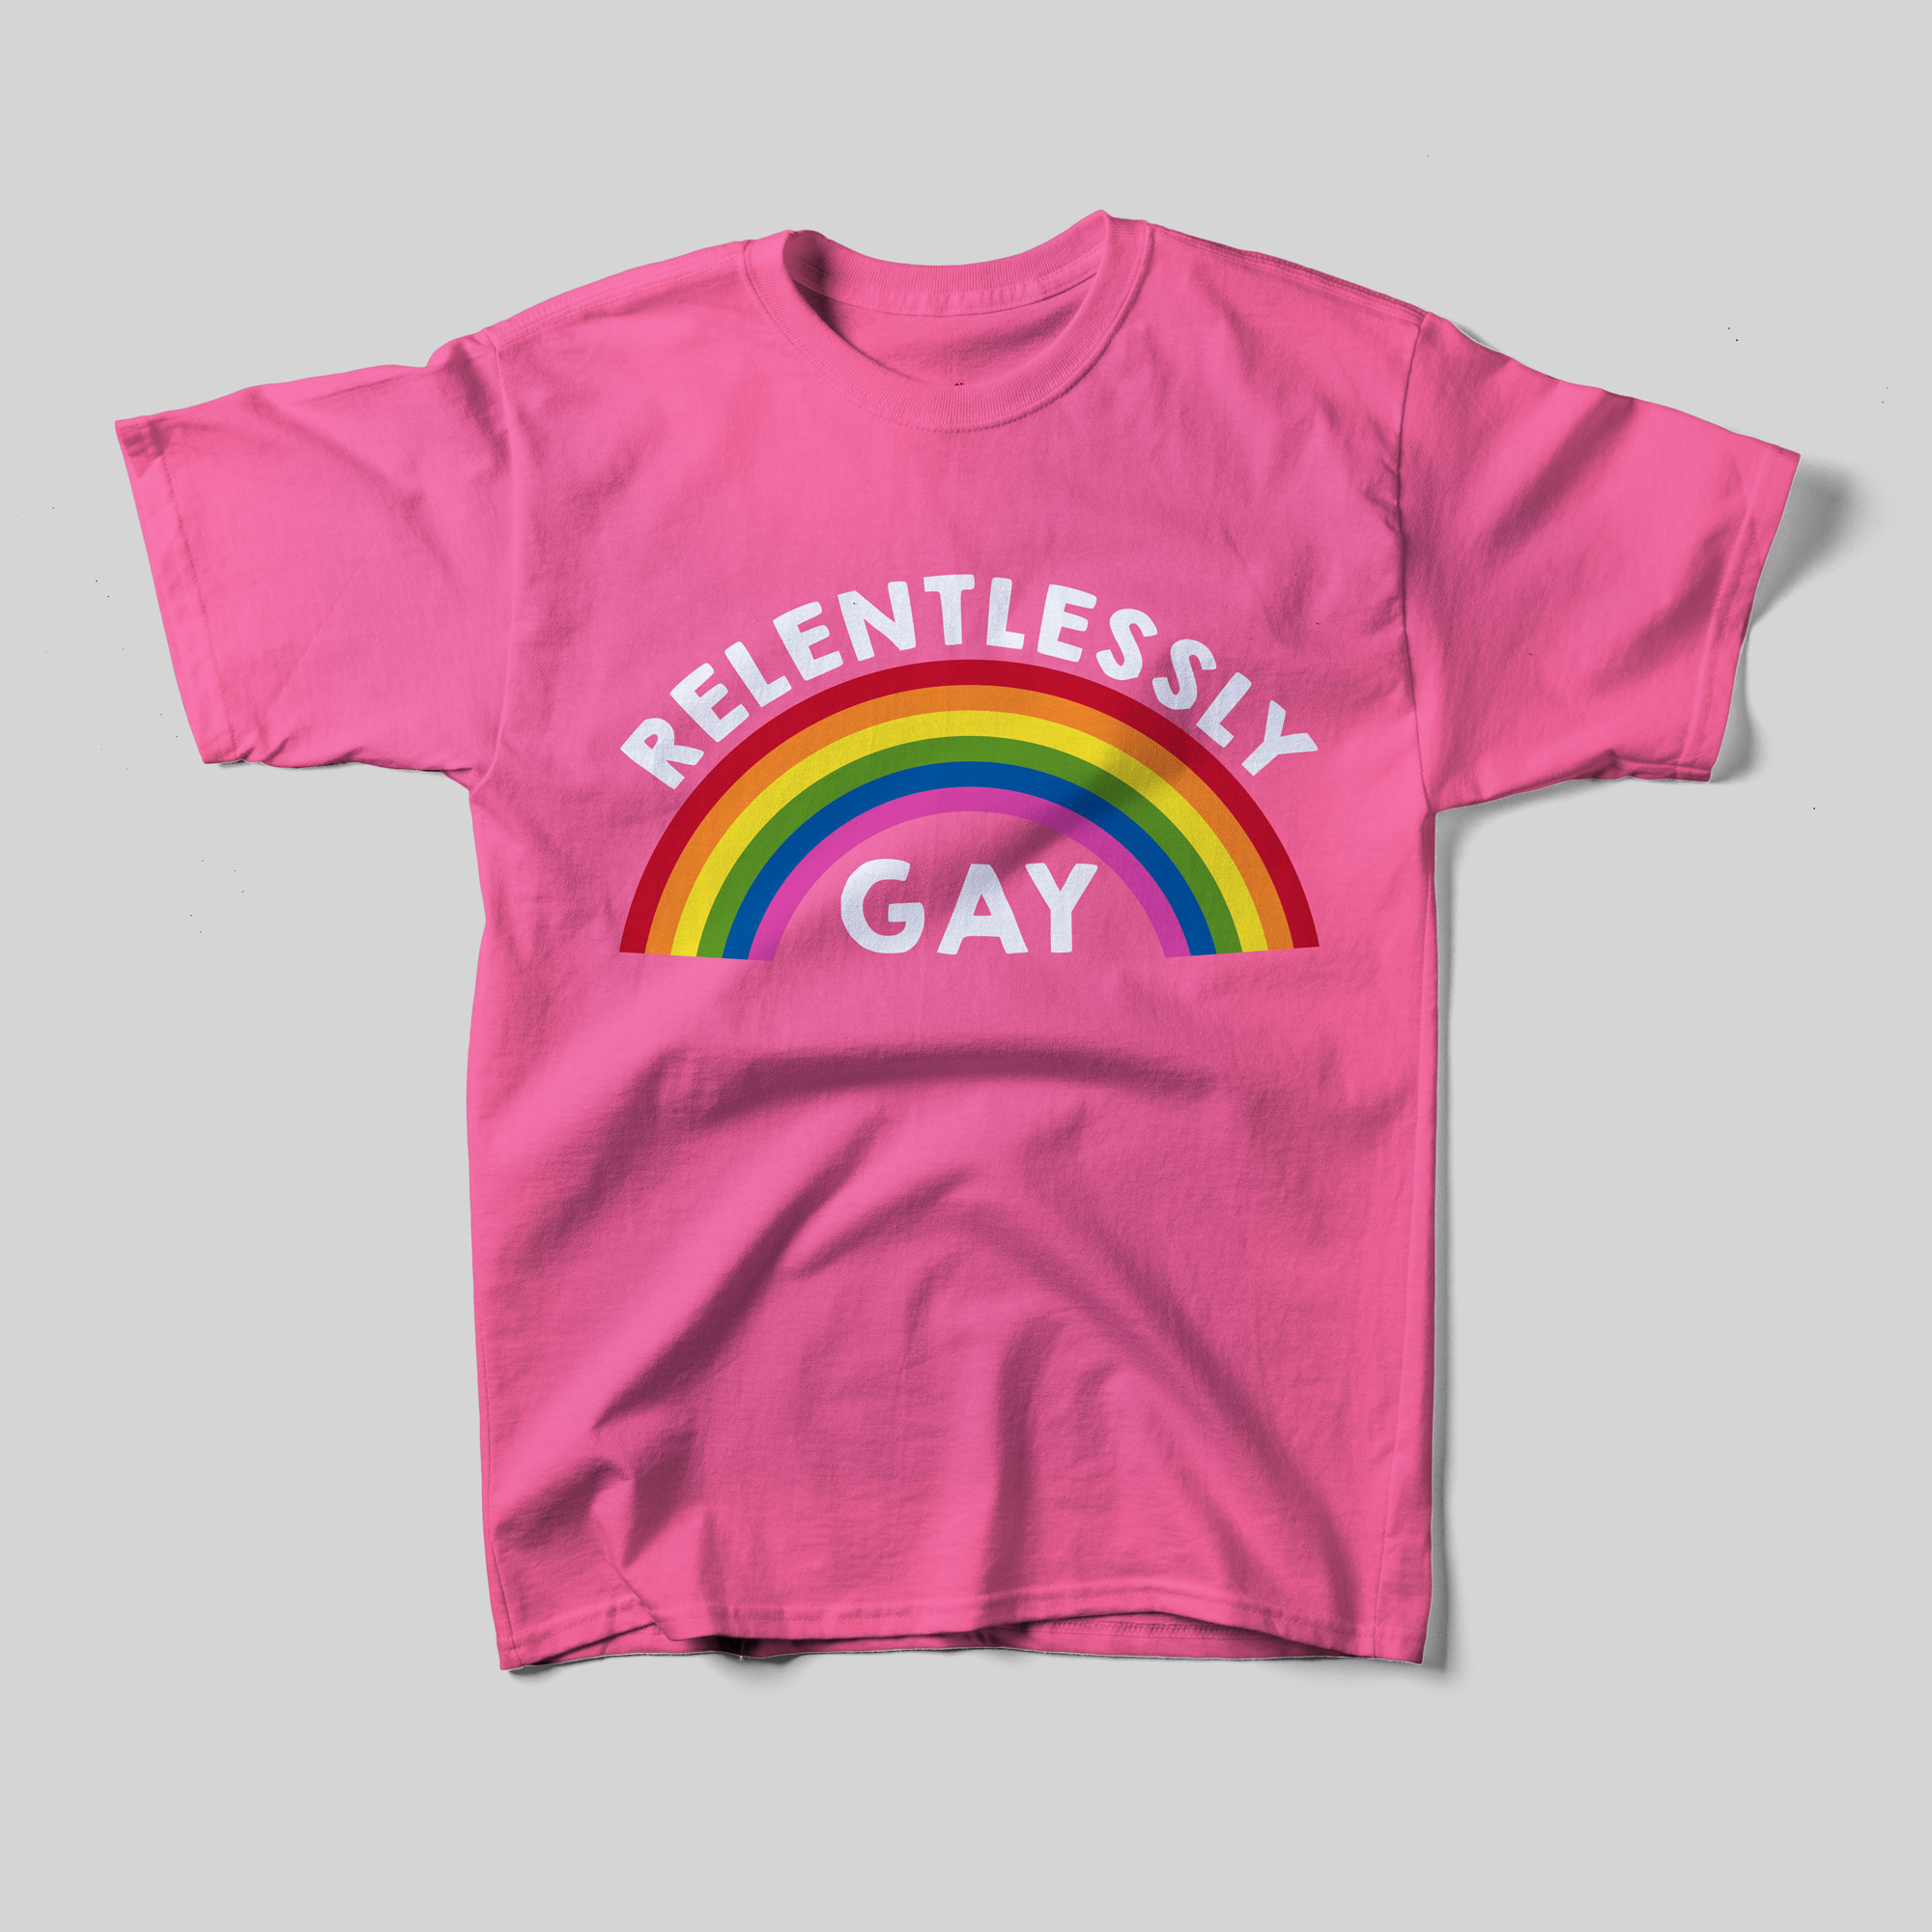 A pink t-shirt that reads Relentlessly Gay and an illustration of a rainbow between each word.